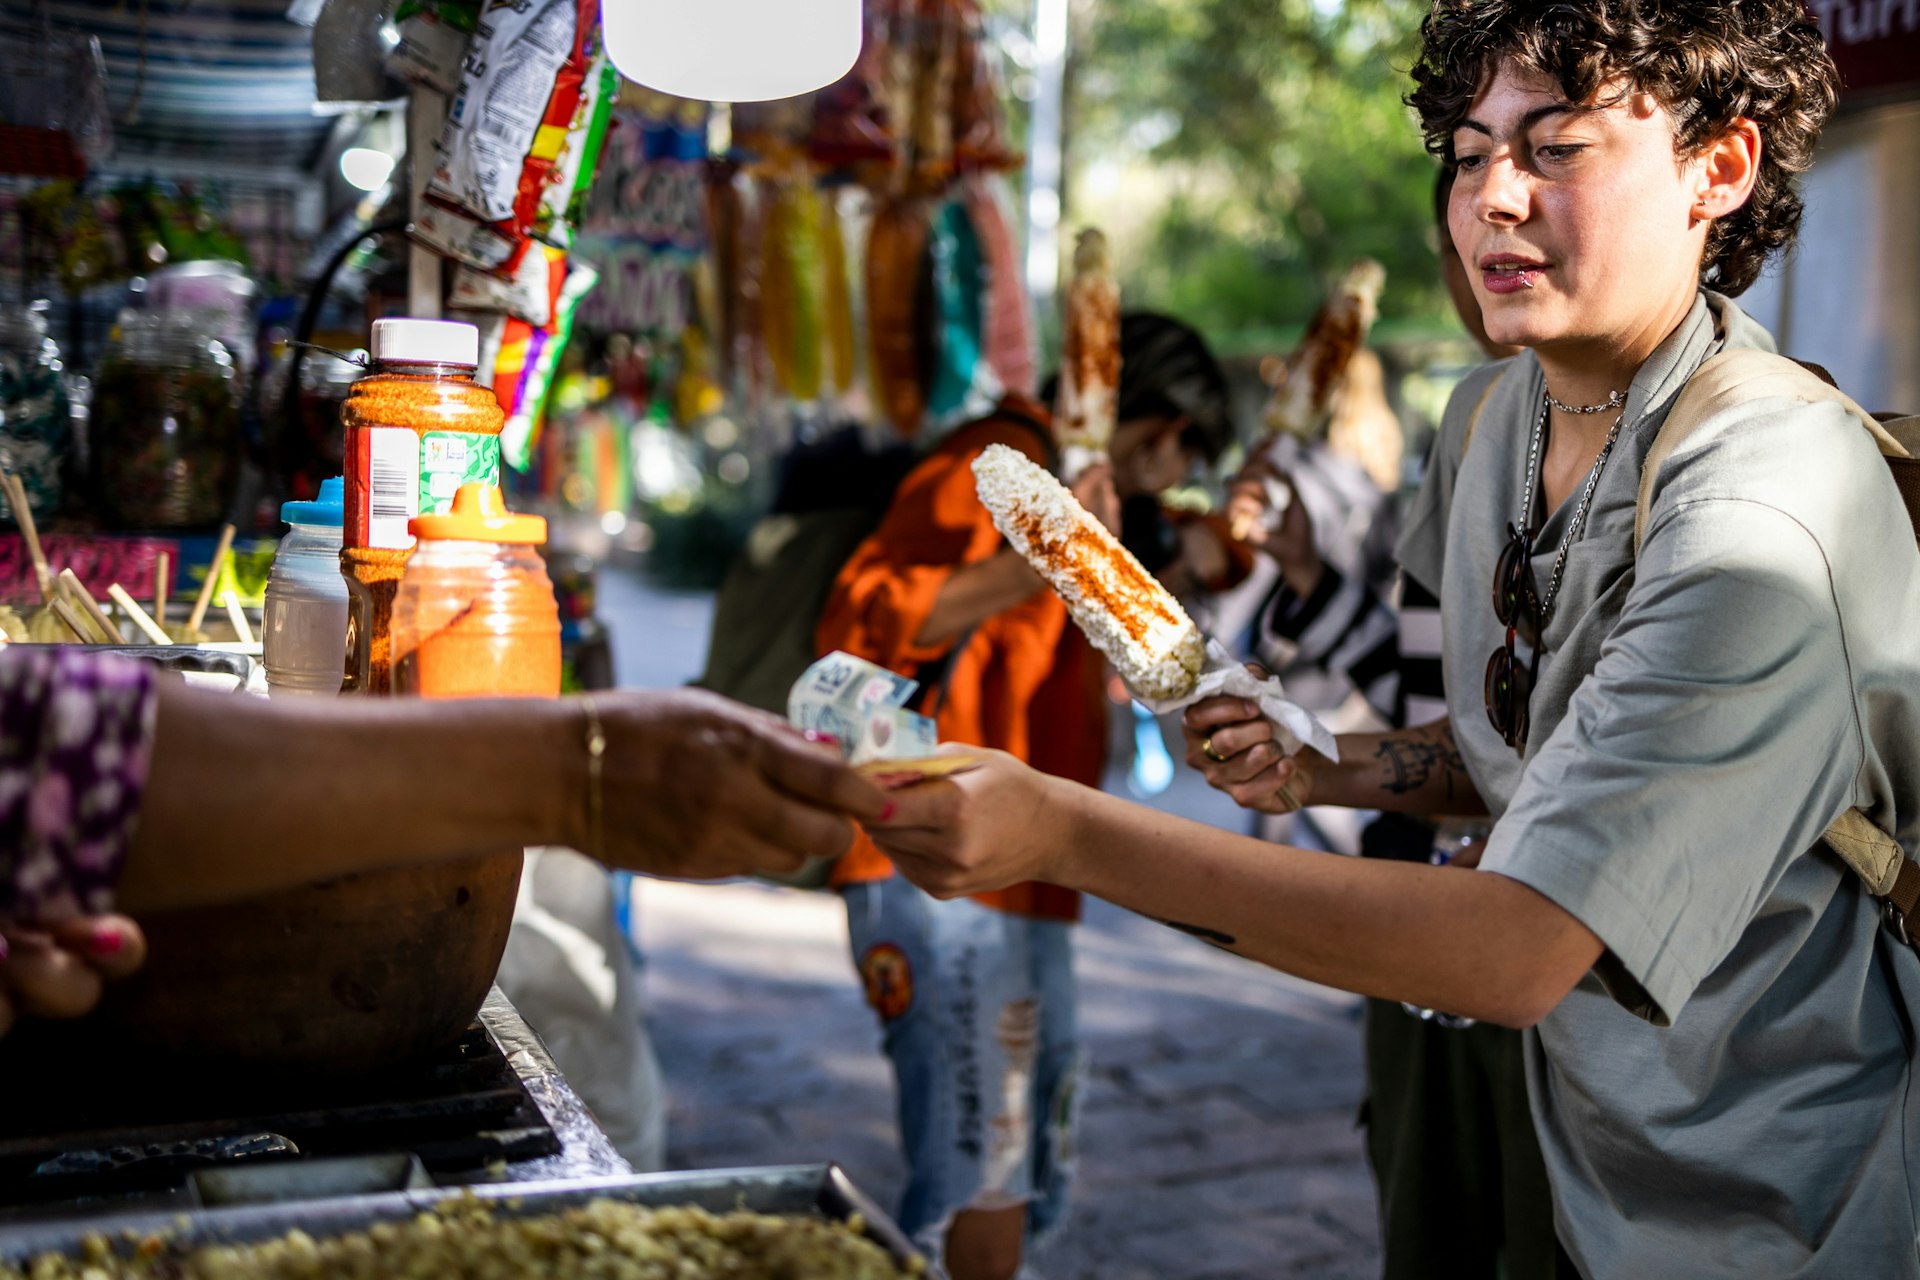 A woman pays for a sweetcorn on a stick at street food stall in Mexico